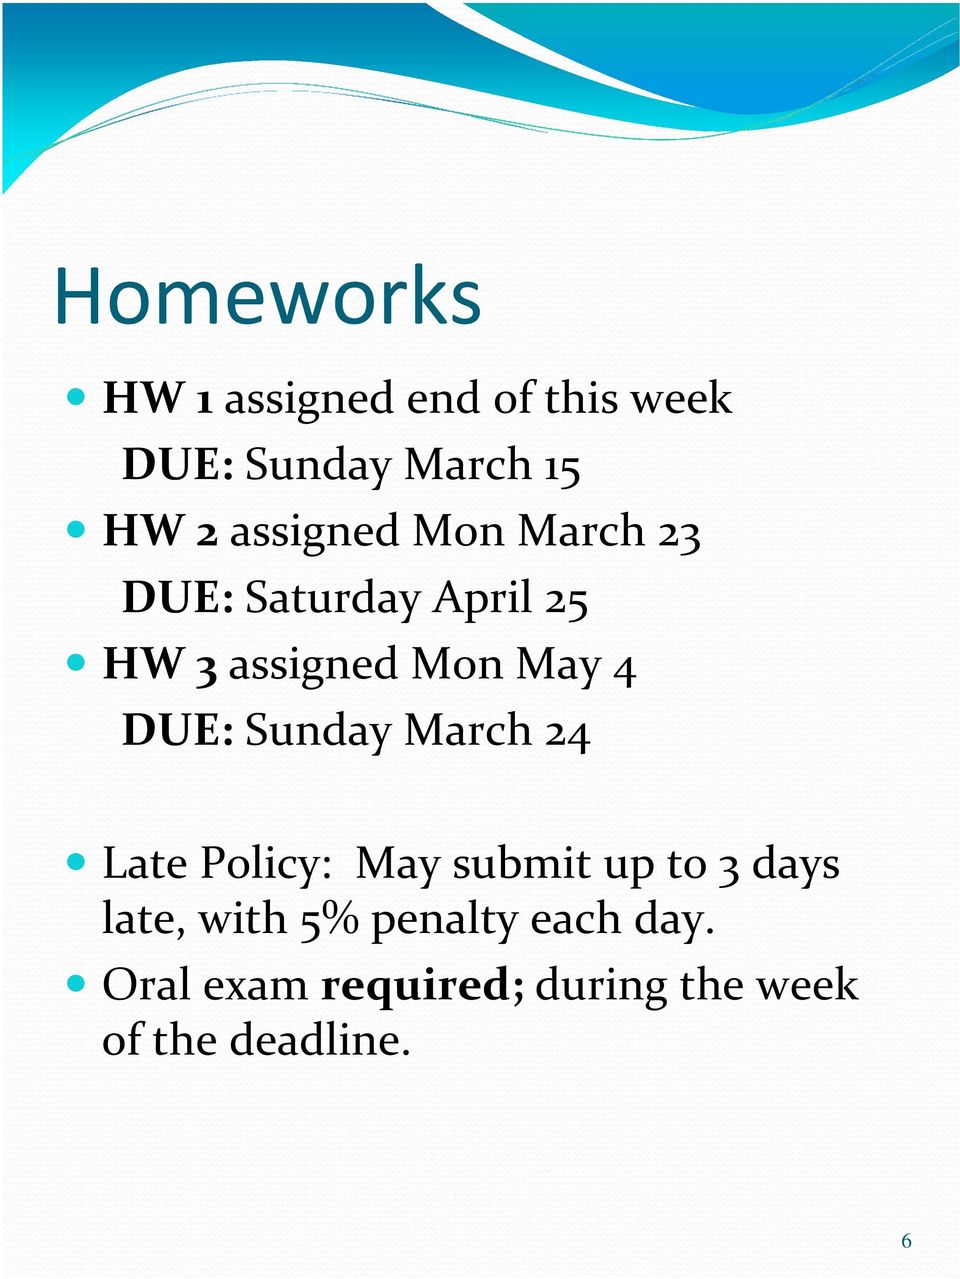 DUE: Sunday March 24 Late Policy: May submit up to 3 days late, with